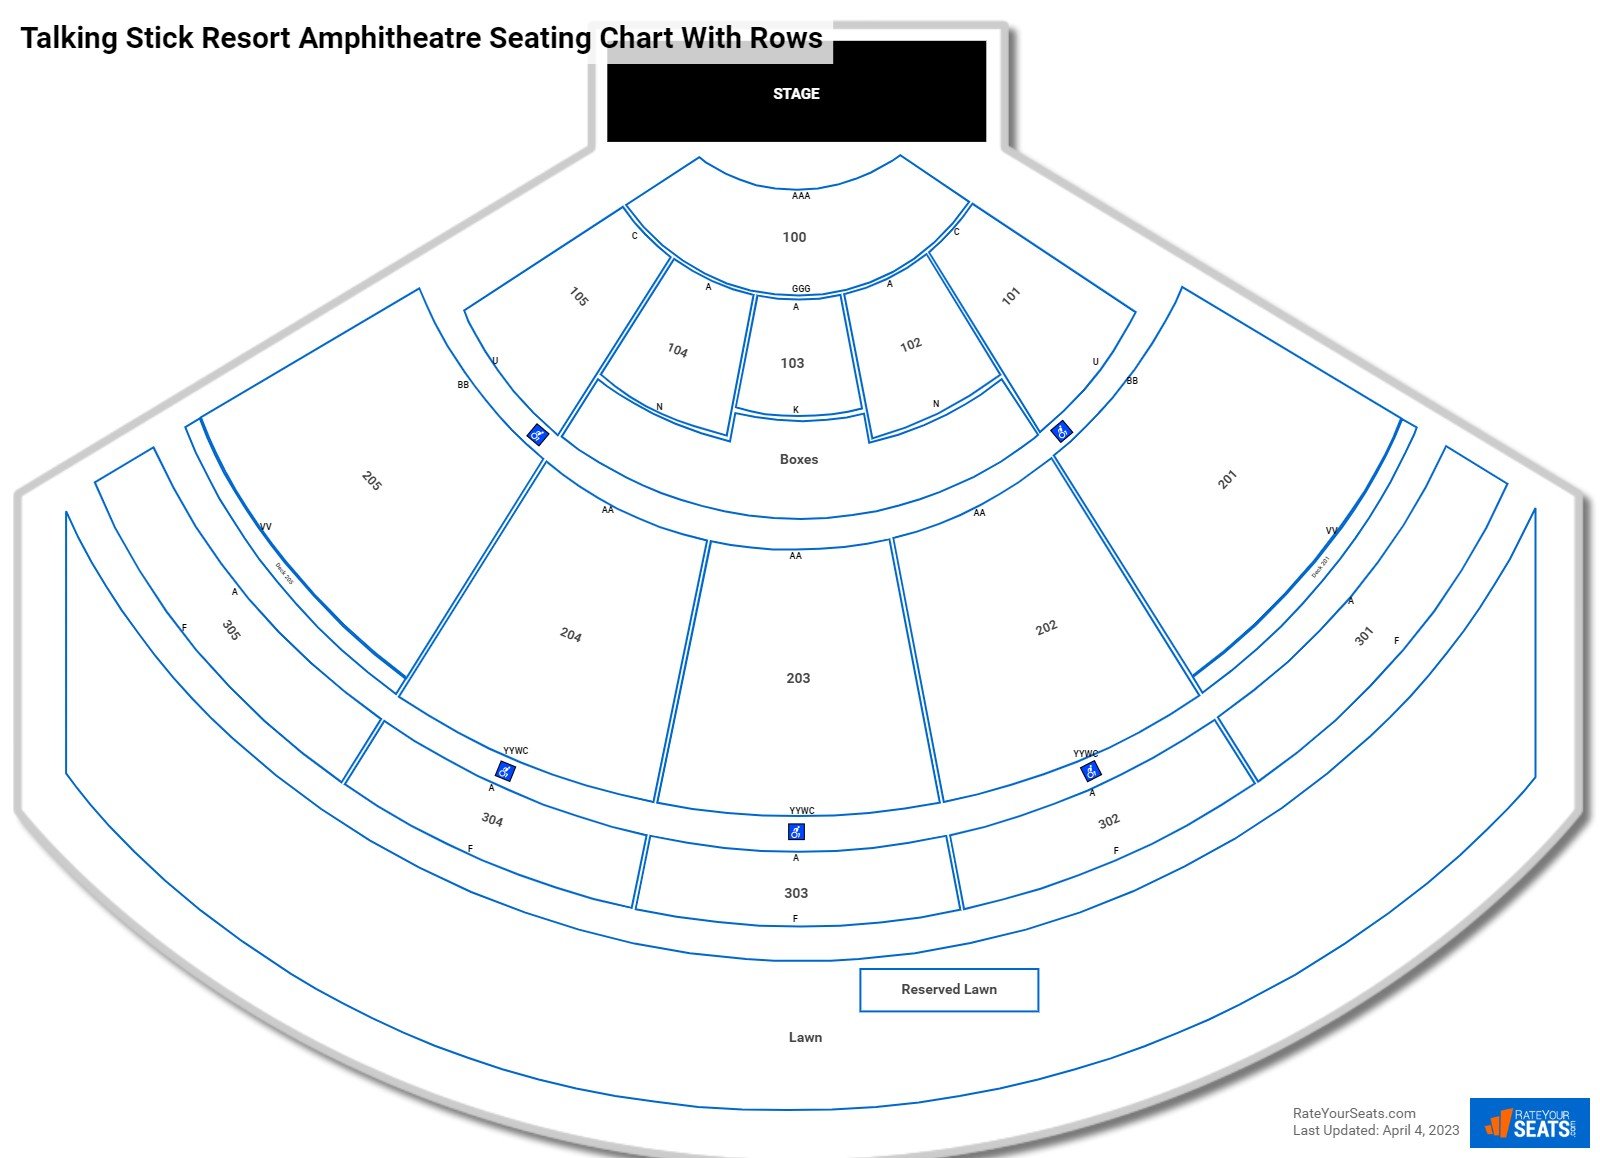 Talking Stick Resort Amphitheatre seating chart with row numbers